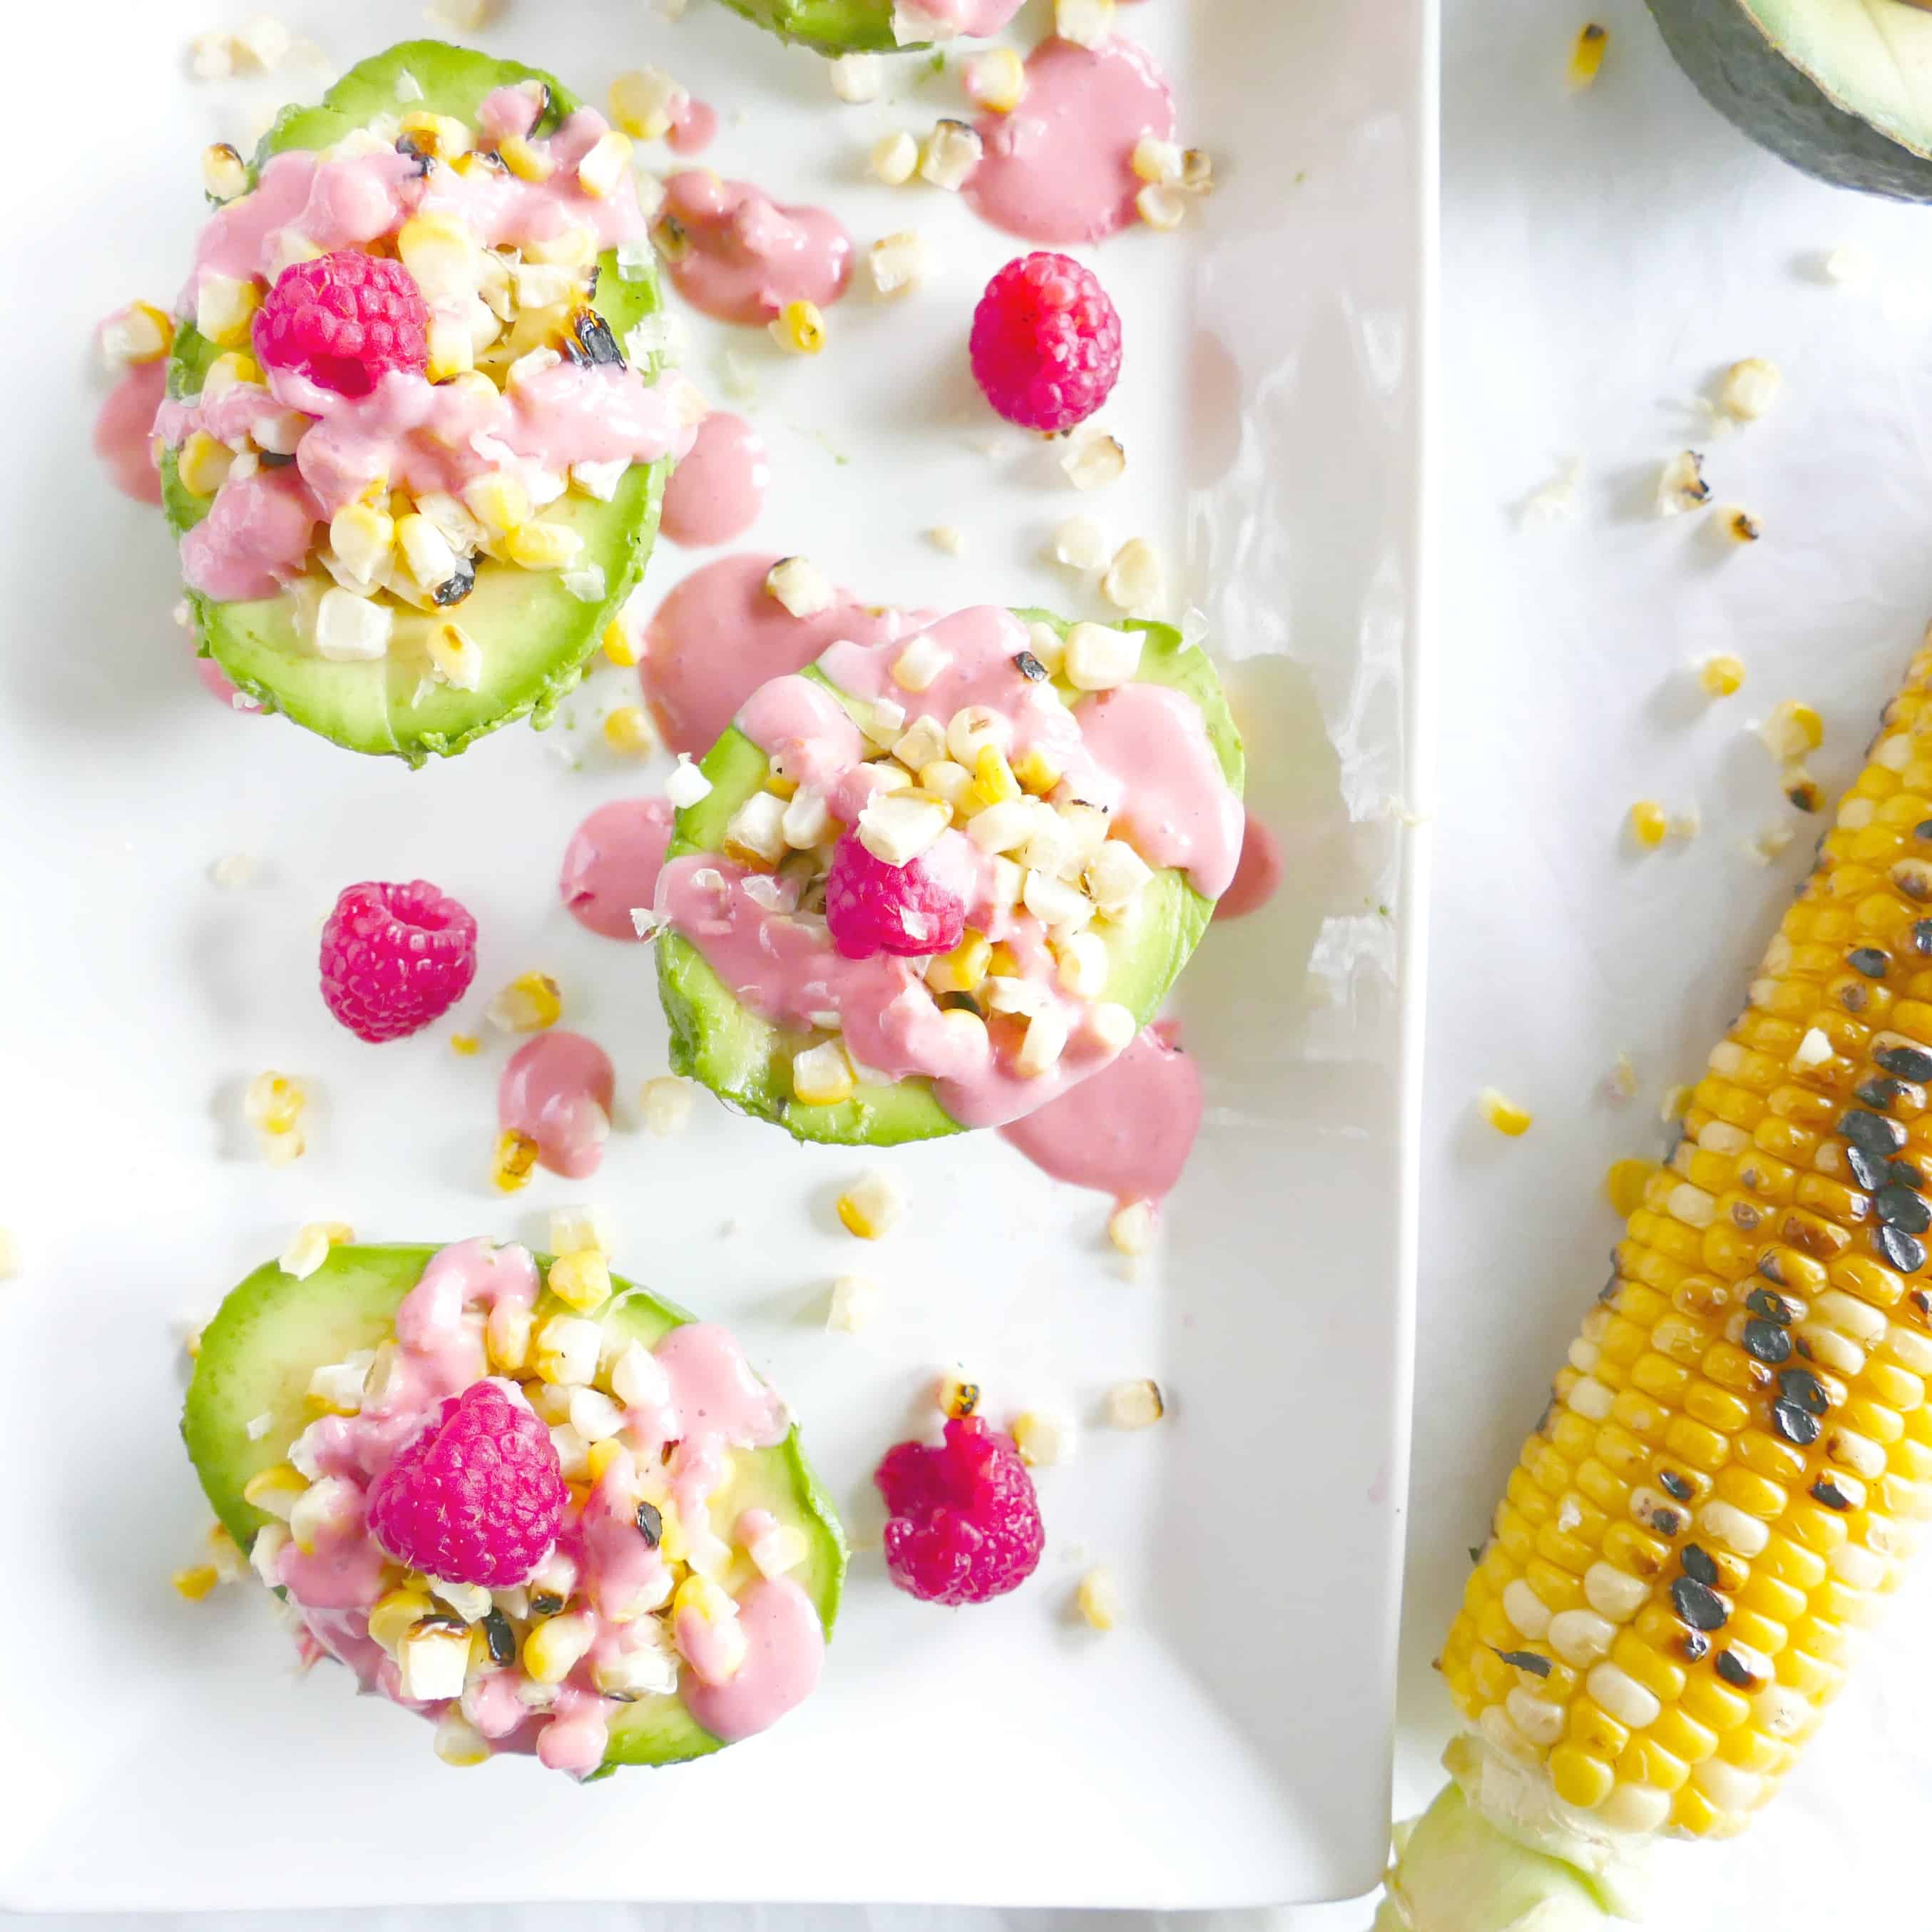 Blistered Corn Avocado Cups